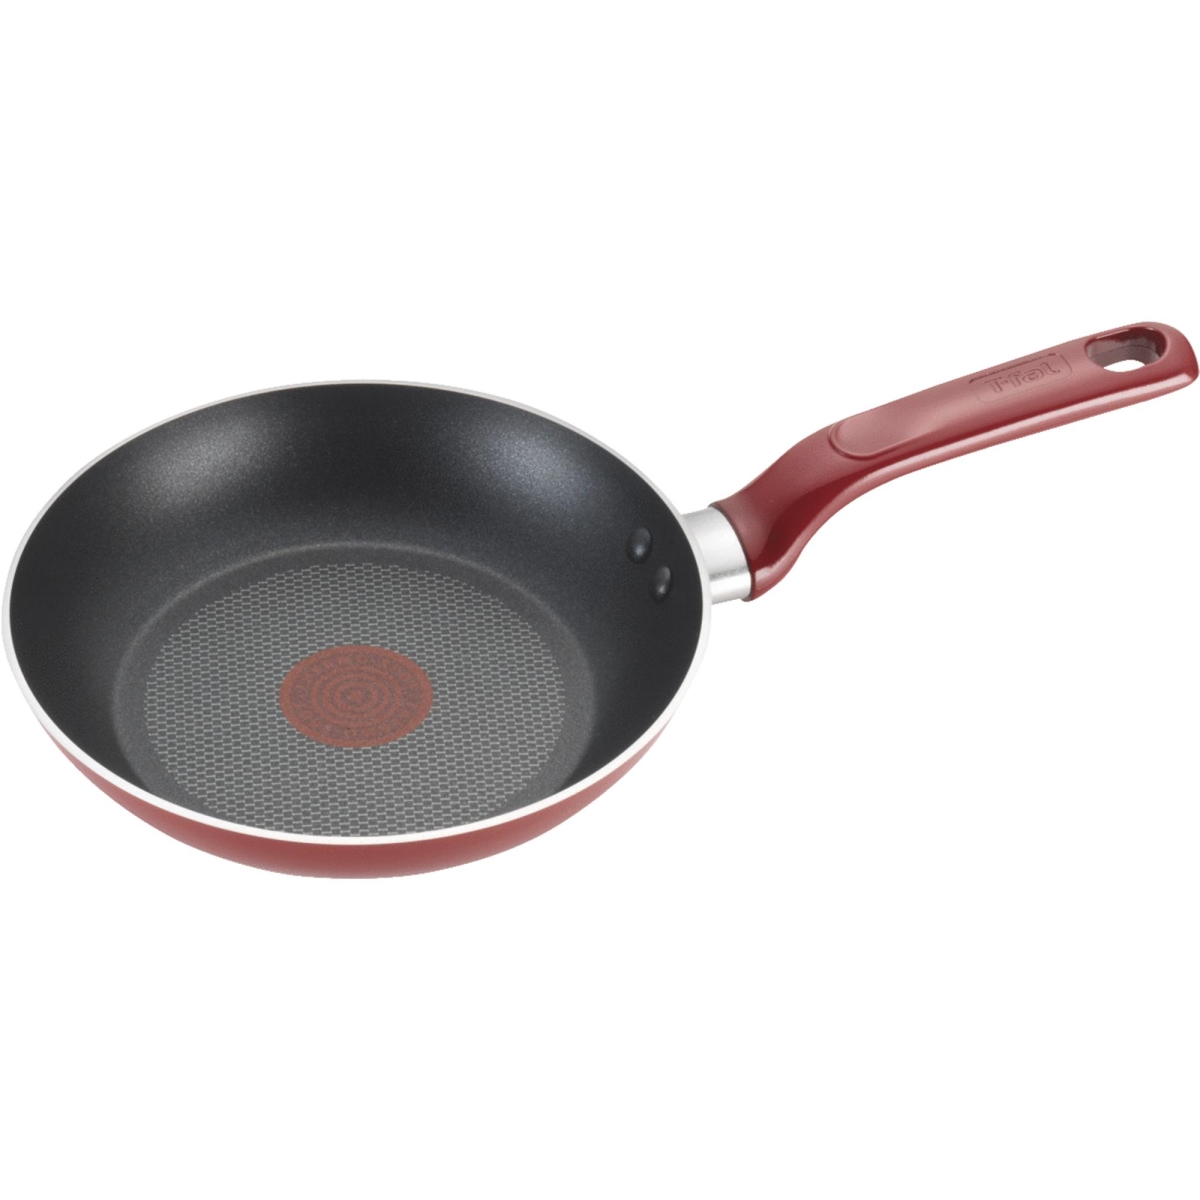 Picture of T-Fal 205616 11.5 in. Excite Non-Stick Fry Pan, Cherry Red